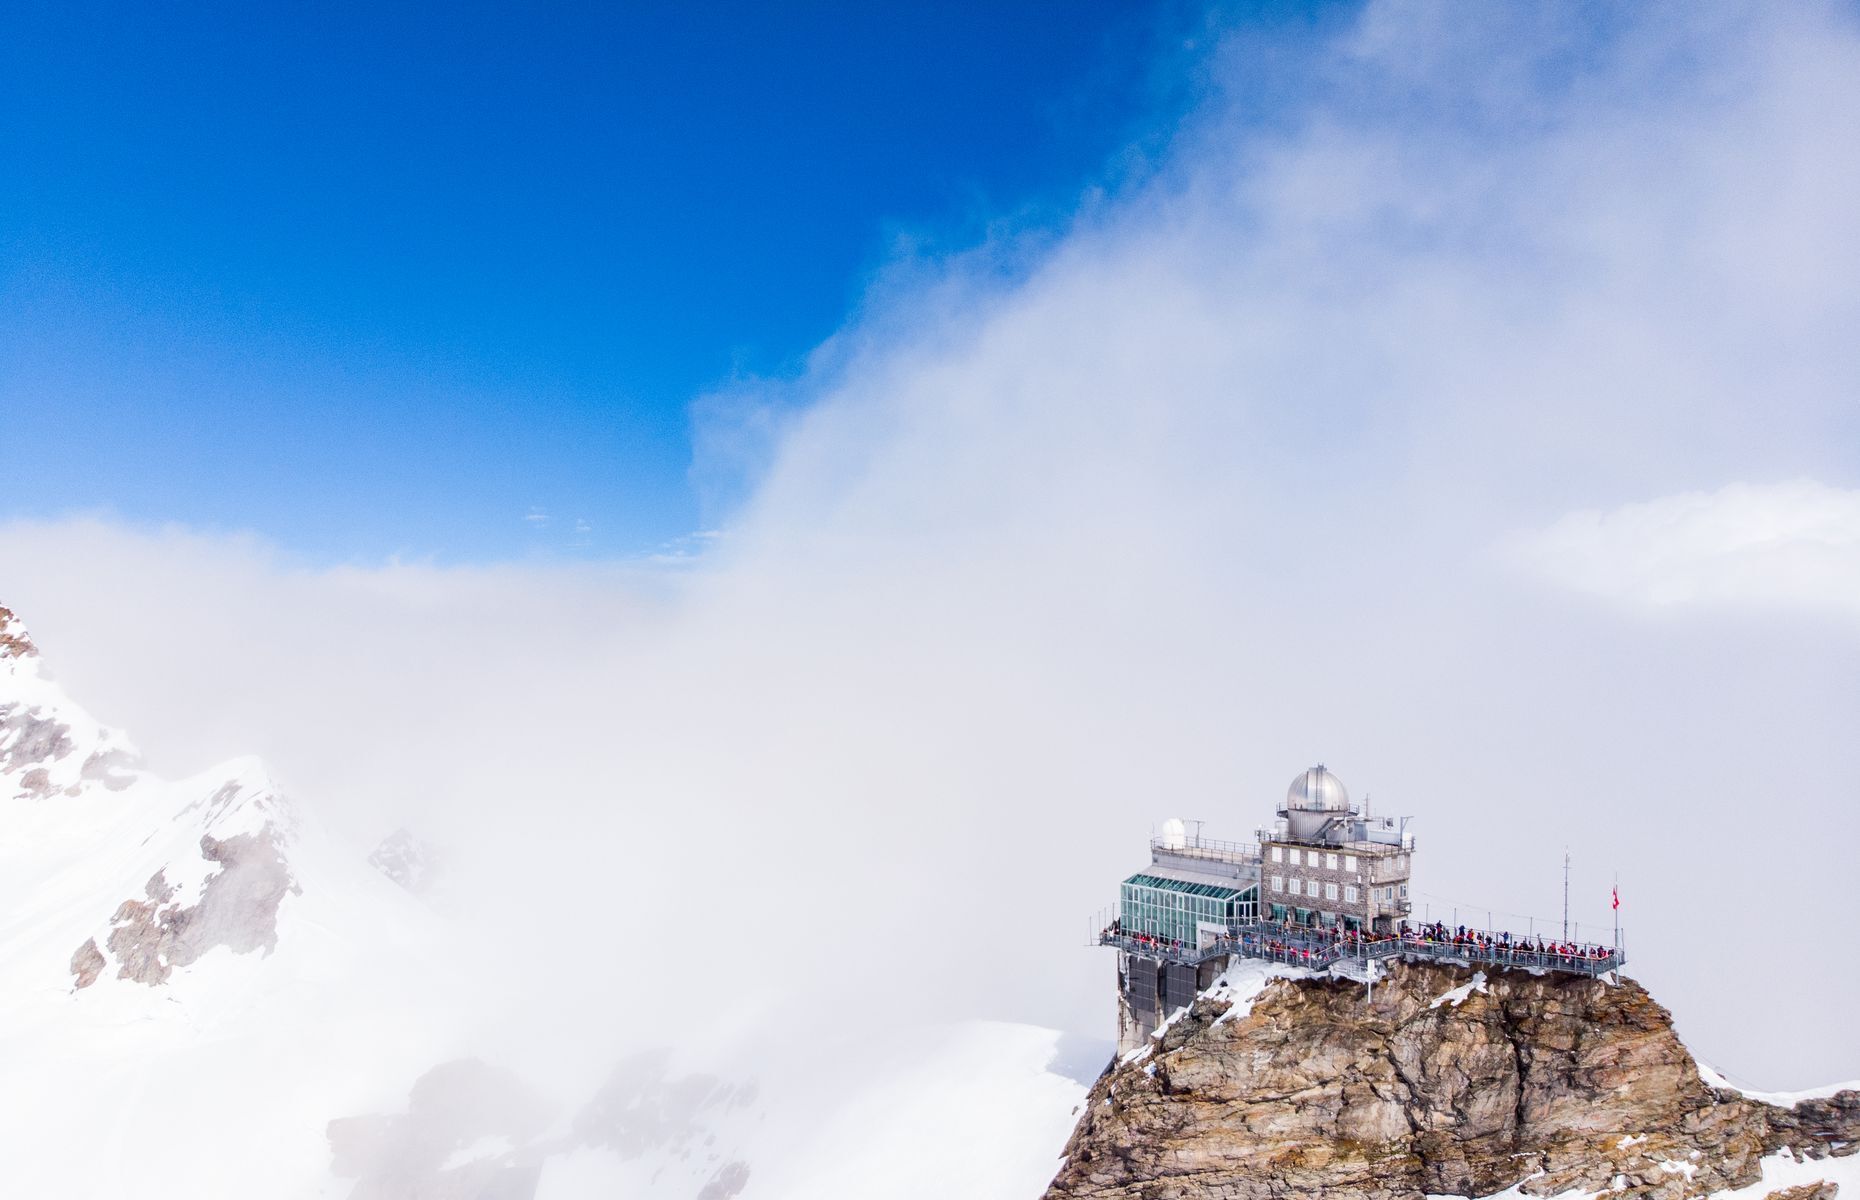 <p>Straight out of a James Bond movie, this historic observatory in Switzerland’s Bernese Alps draws research <a href="https://www.instagram.com/p/CN2gcJpFw8-/">scientists</a> in fields ranging from glaciology to astronomy. A high-speed elevator will take you from the <a href="https://www.jungfrau.ch/en-gb/jungfraujoch-top-of-europe/">Jungfraujoch train station</a> to the <a href="https://www.instagram.com/p/Cd56GqOsiAi/">Sphinx Observatory</a>, Europe’s highest building, in just <a href="https://www.jungfrau.ch/en-gb/jungfraujoch-top-of-europe/sphinx-observation-deck/">25 seconds</a>.</p>